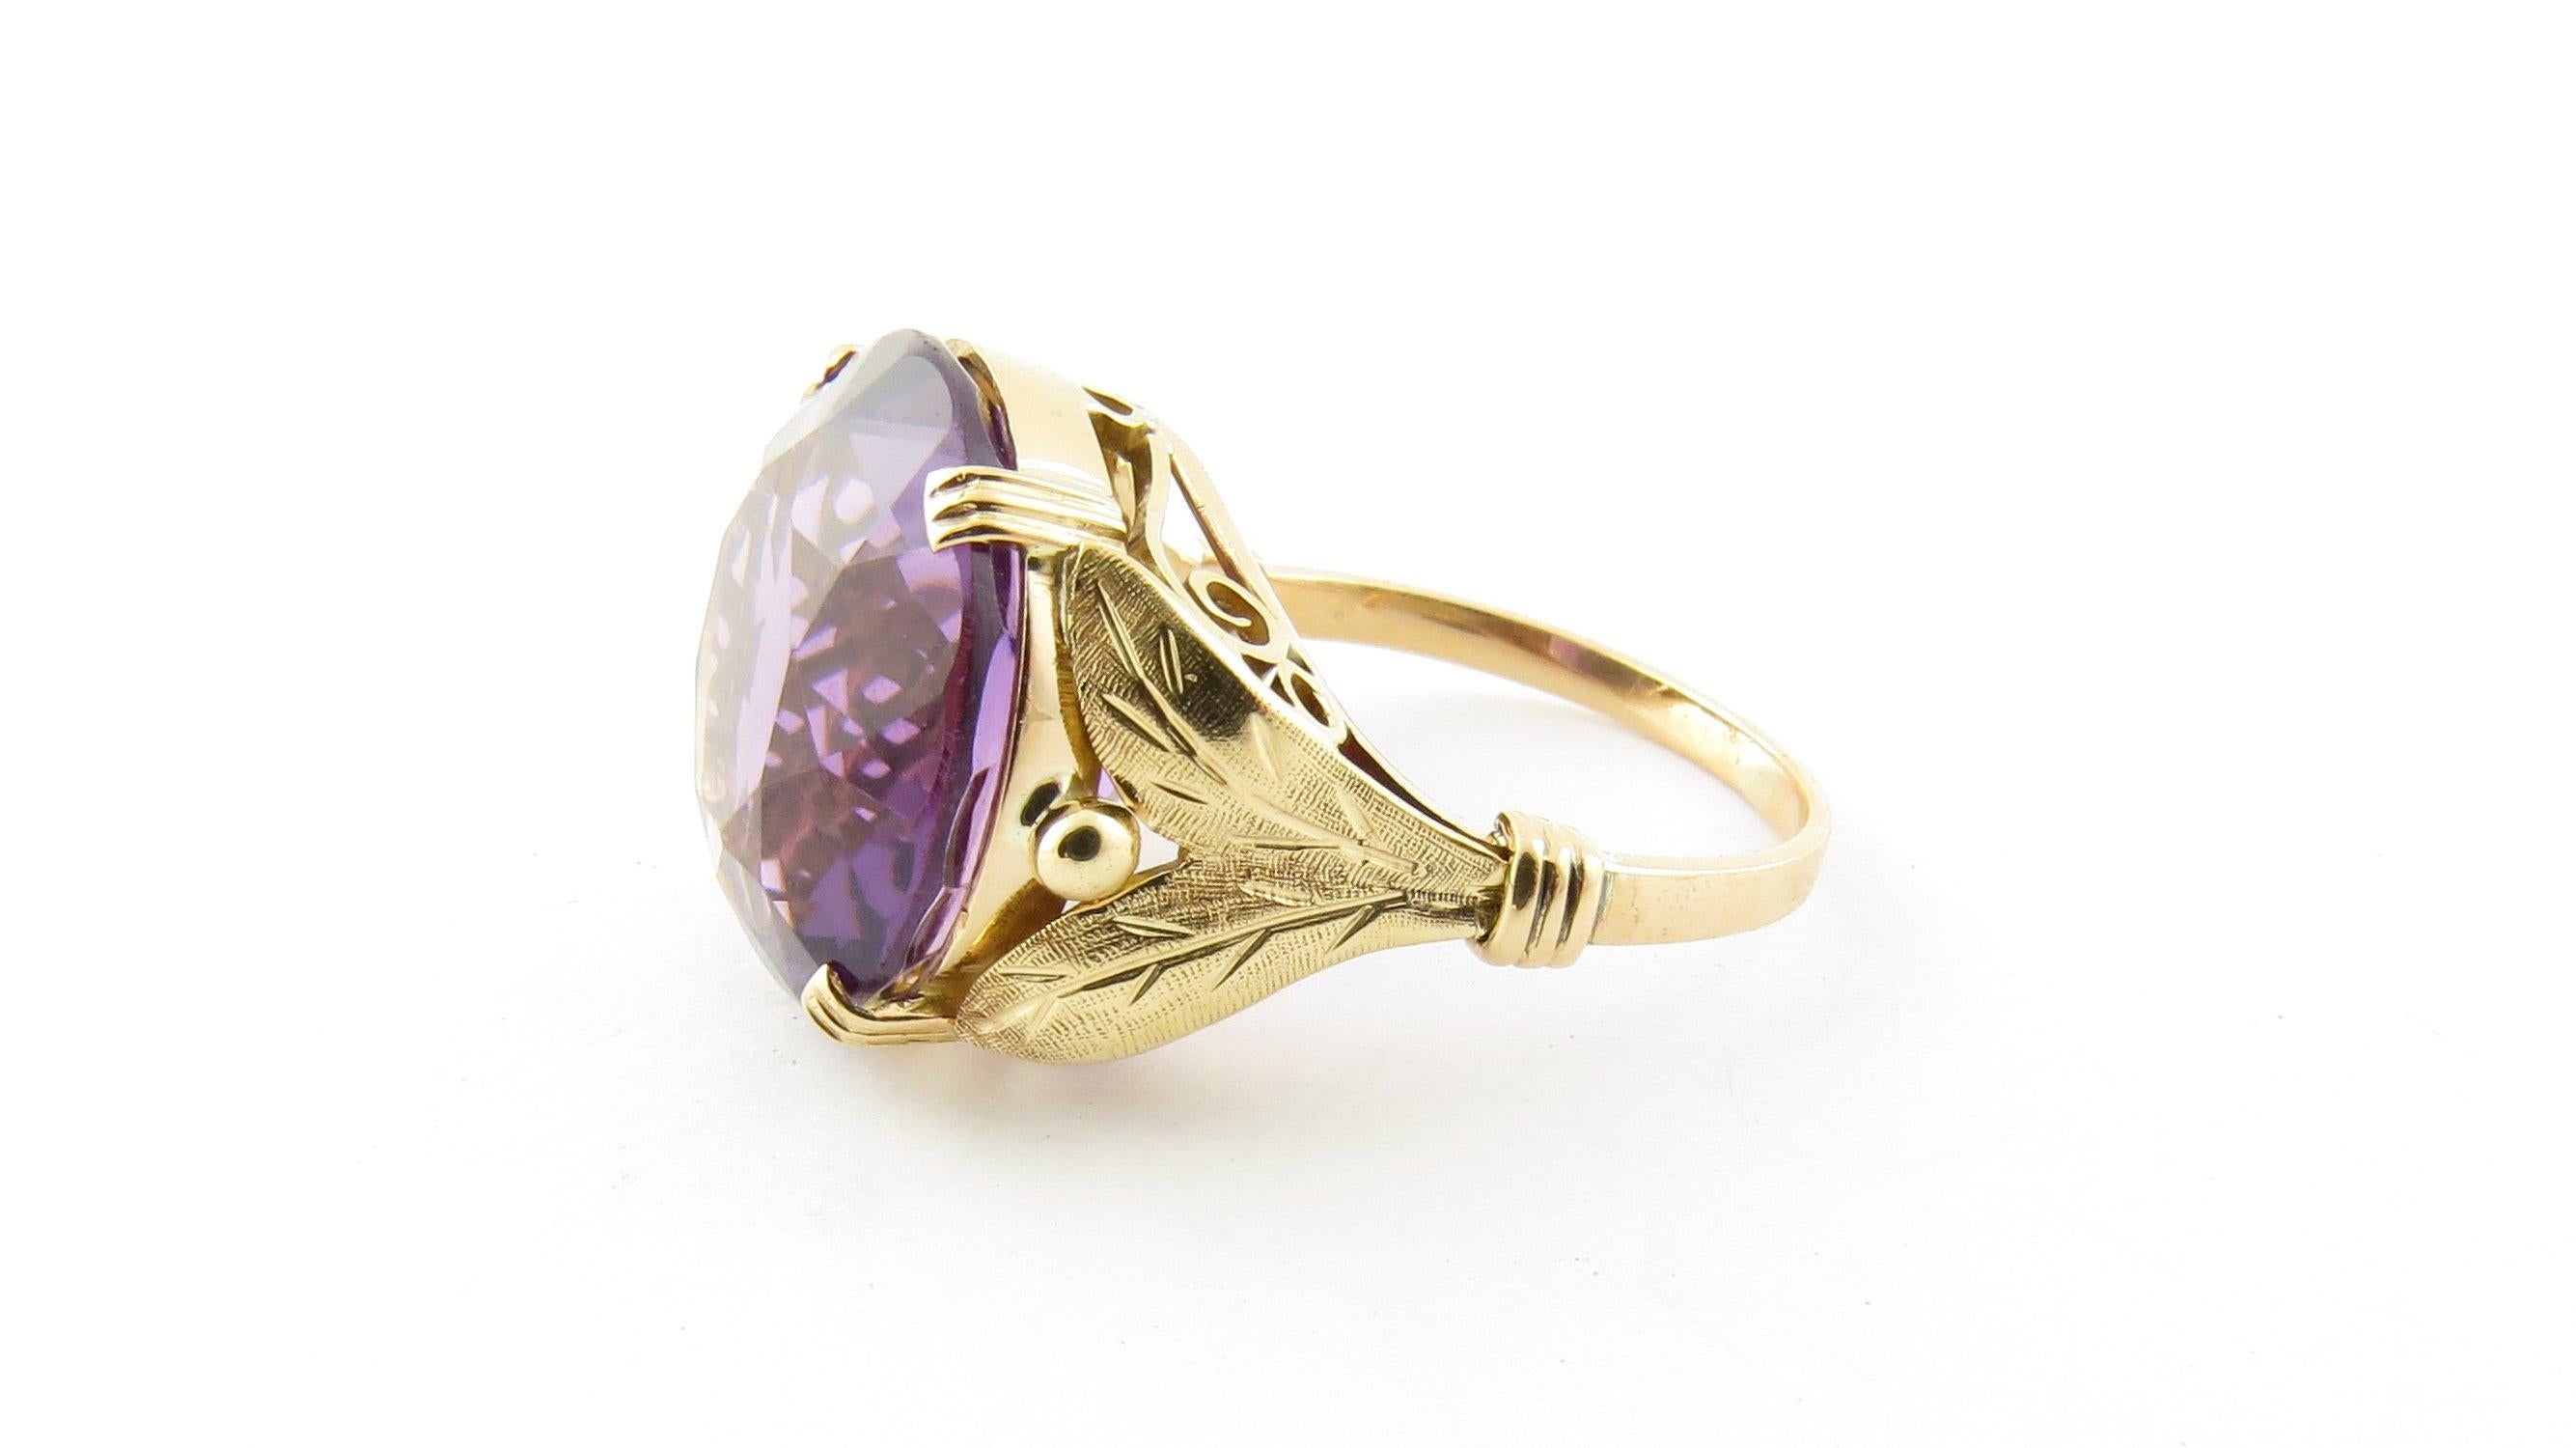 Vintage 14 Karat Yellow Gold Amethyst Ring Size 7.5-This stunning ring features one round amethyst (15 mm) set in meticulously detailed 14K yellow gold. Shank measures 1.5 mm. Ring Size: 7.5 Weight: 4.0 dwt. / 6.3 gr. Acid tested for 14K gold. Very